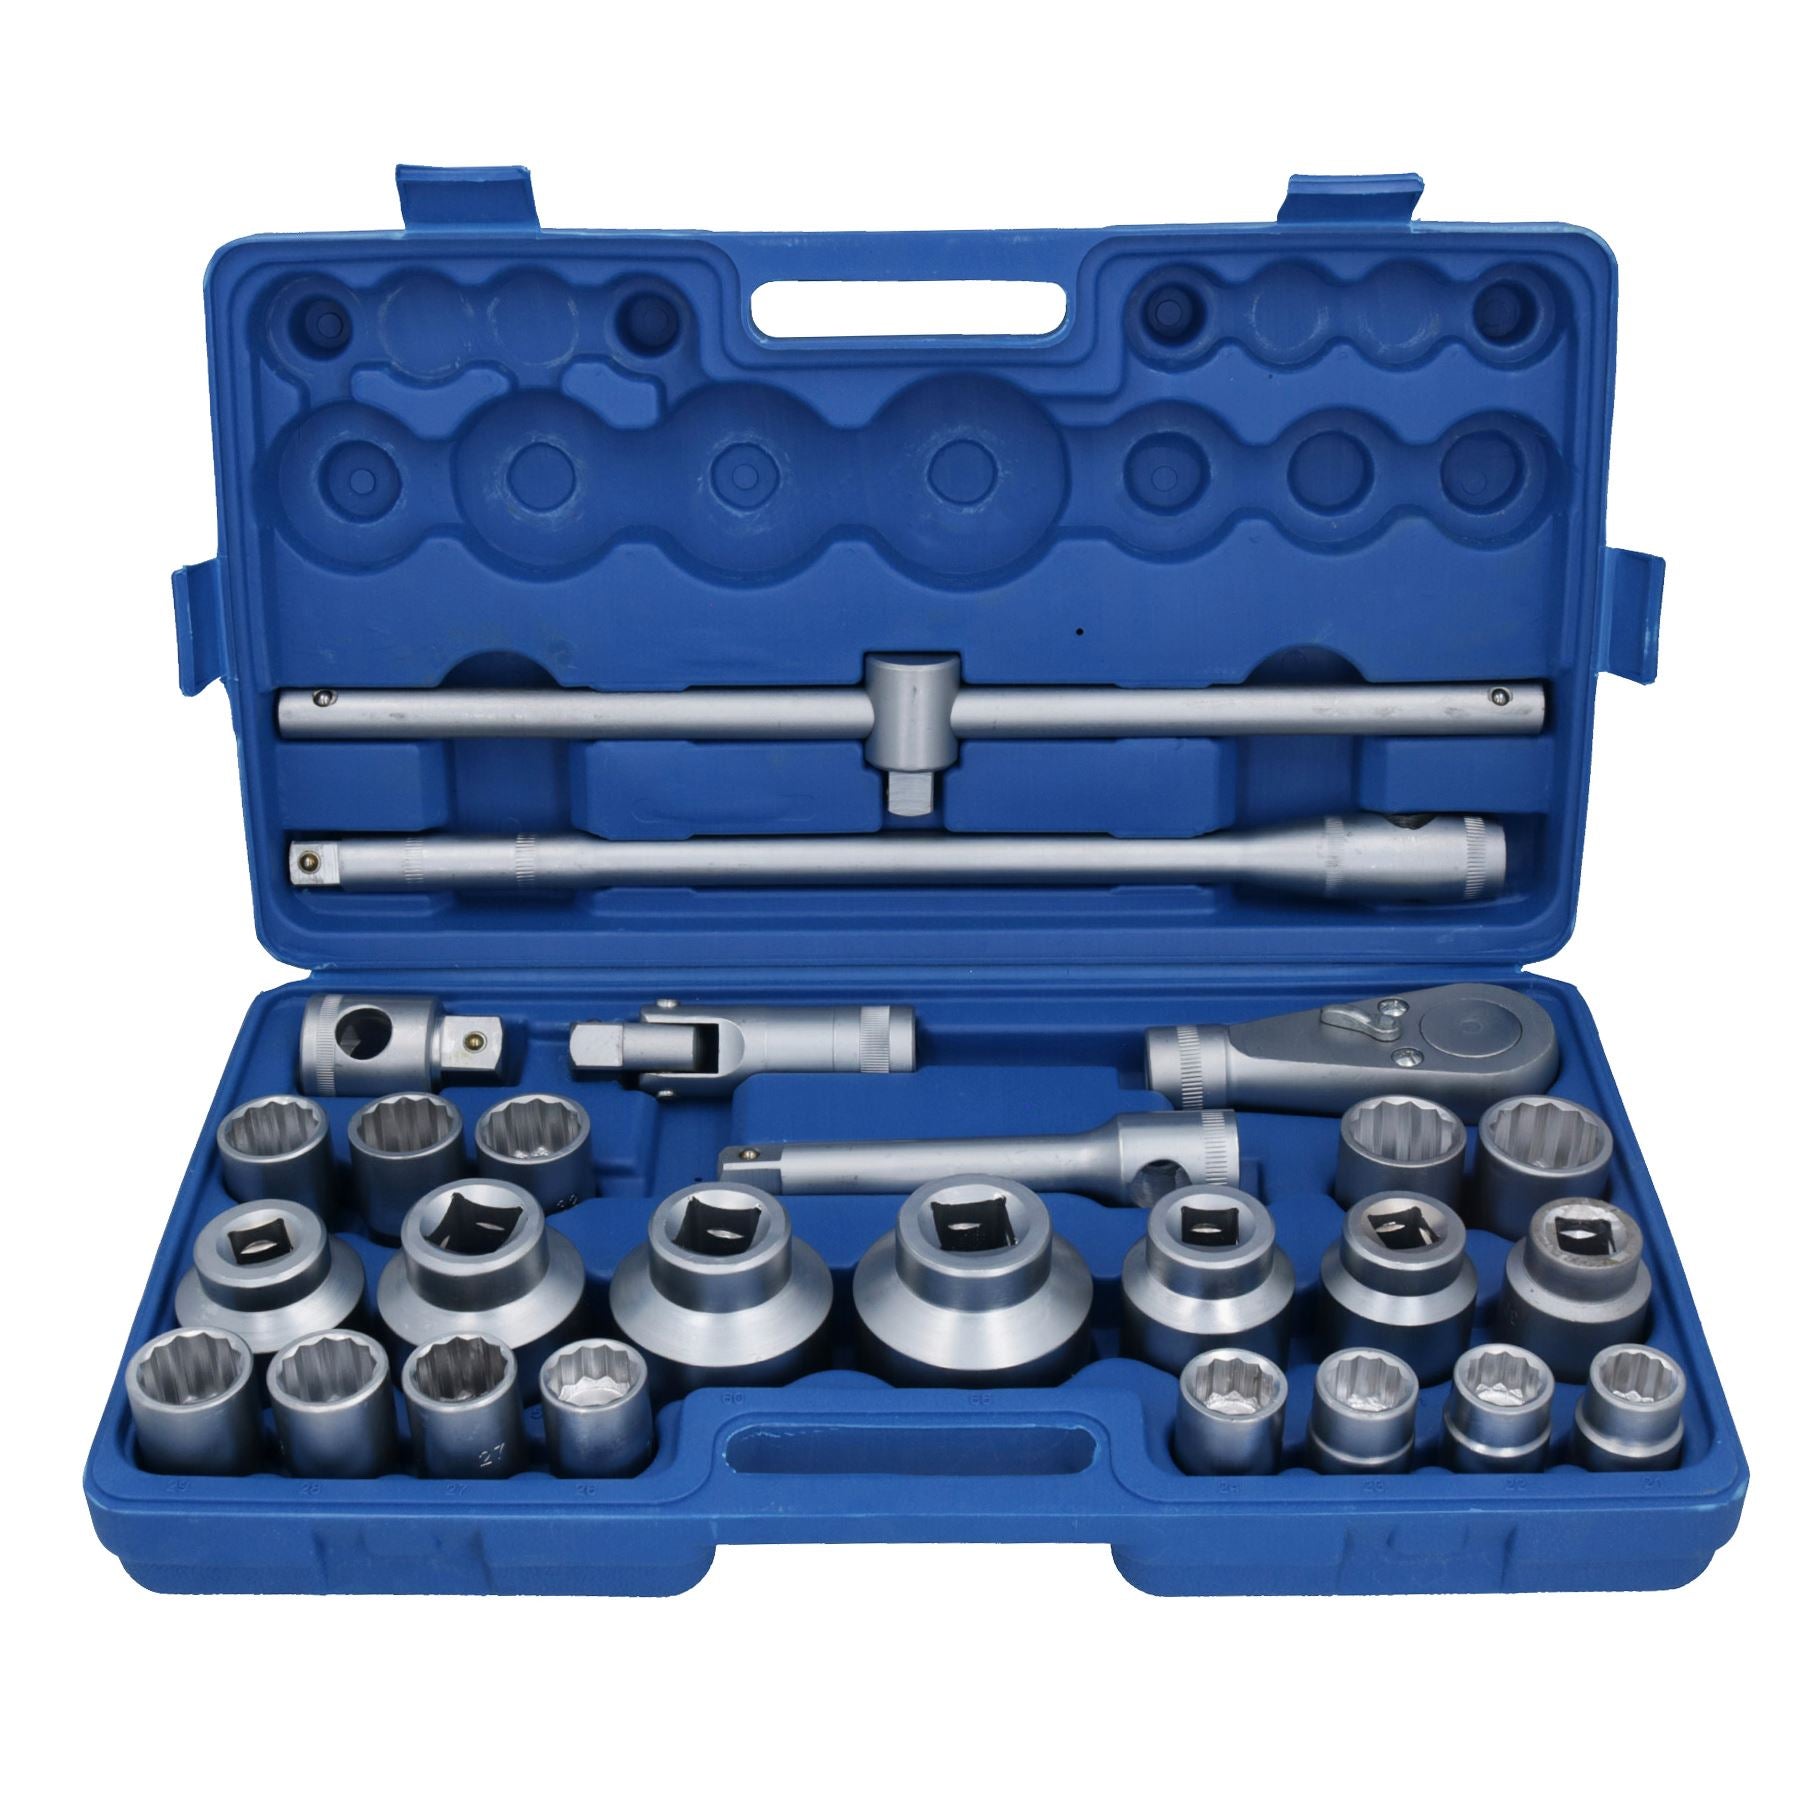 26pc 3/4" dr and 1" dr Shallow Socket Set 21mm - 65mm Metric Sizes Ratchet TE568